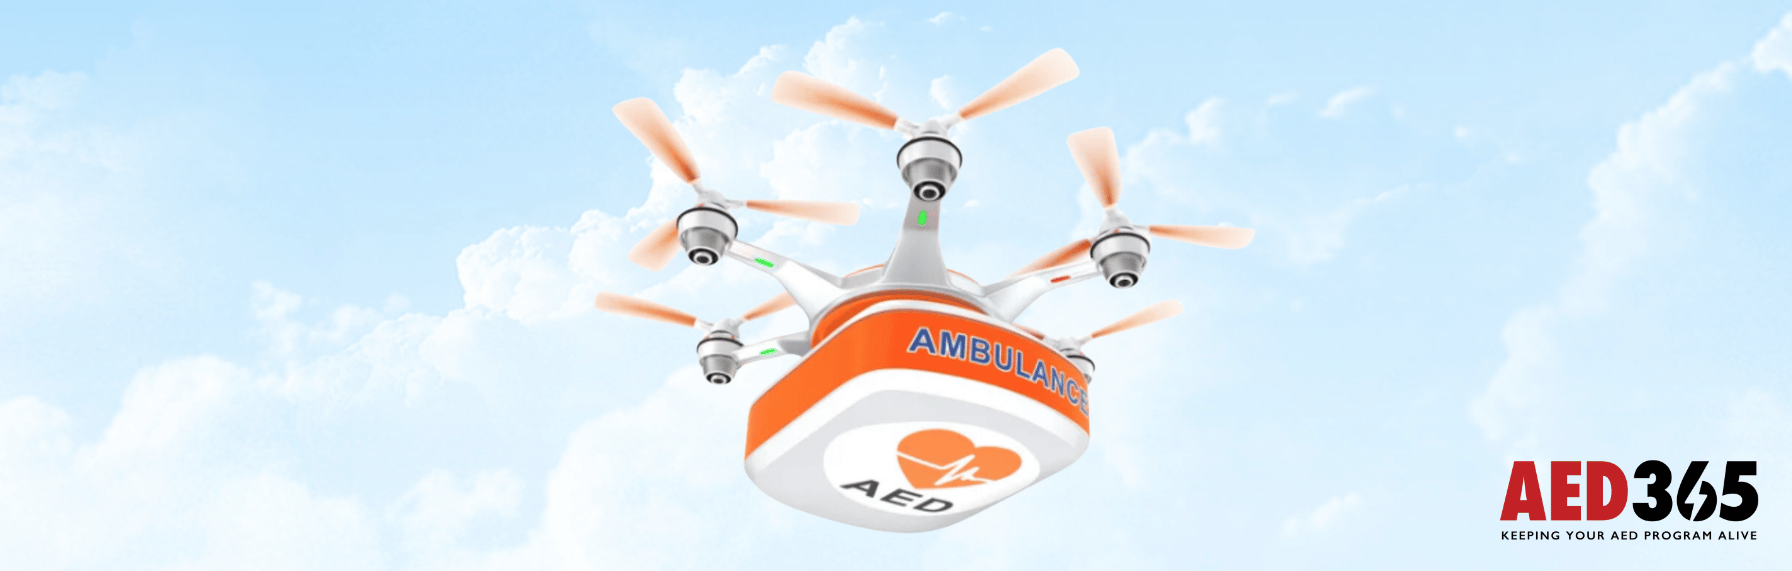 AED Delivery by Drones